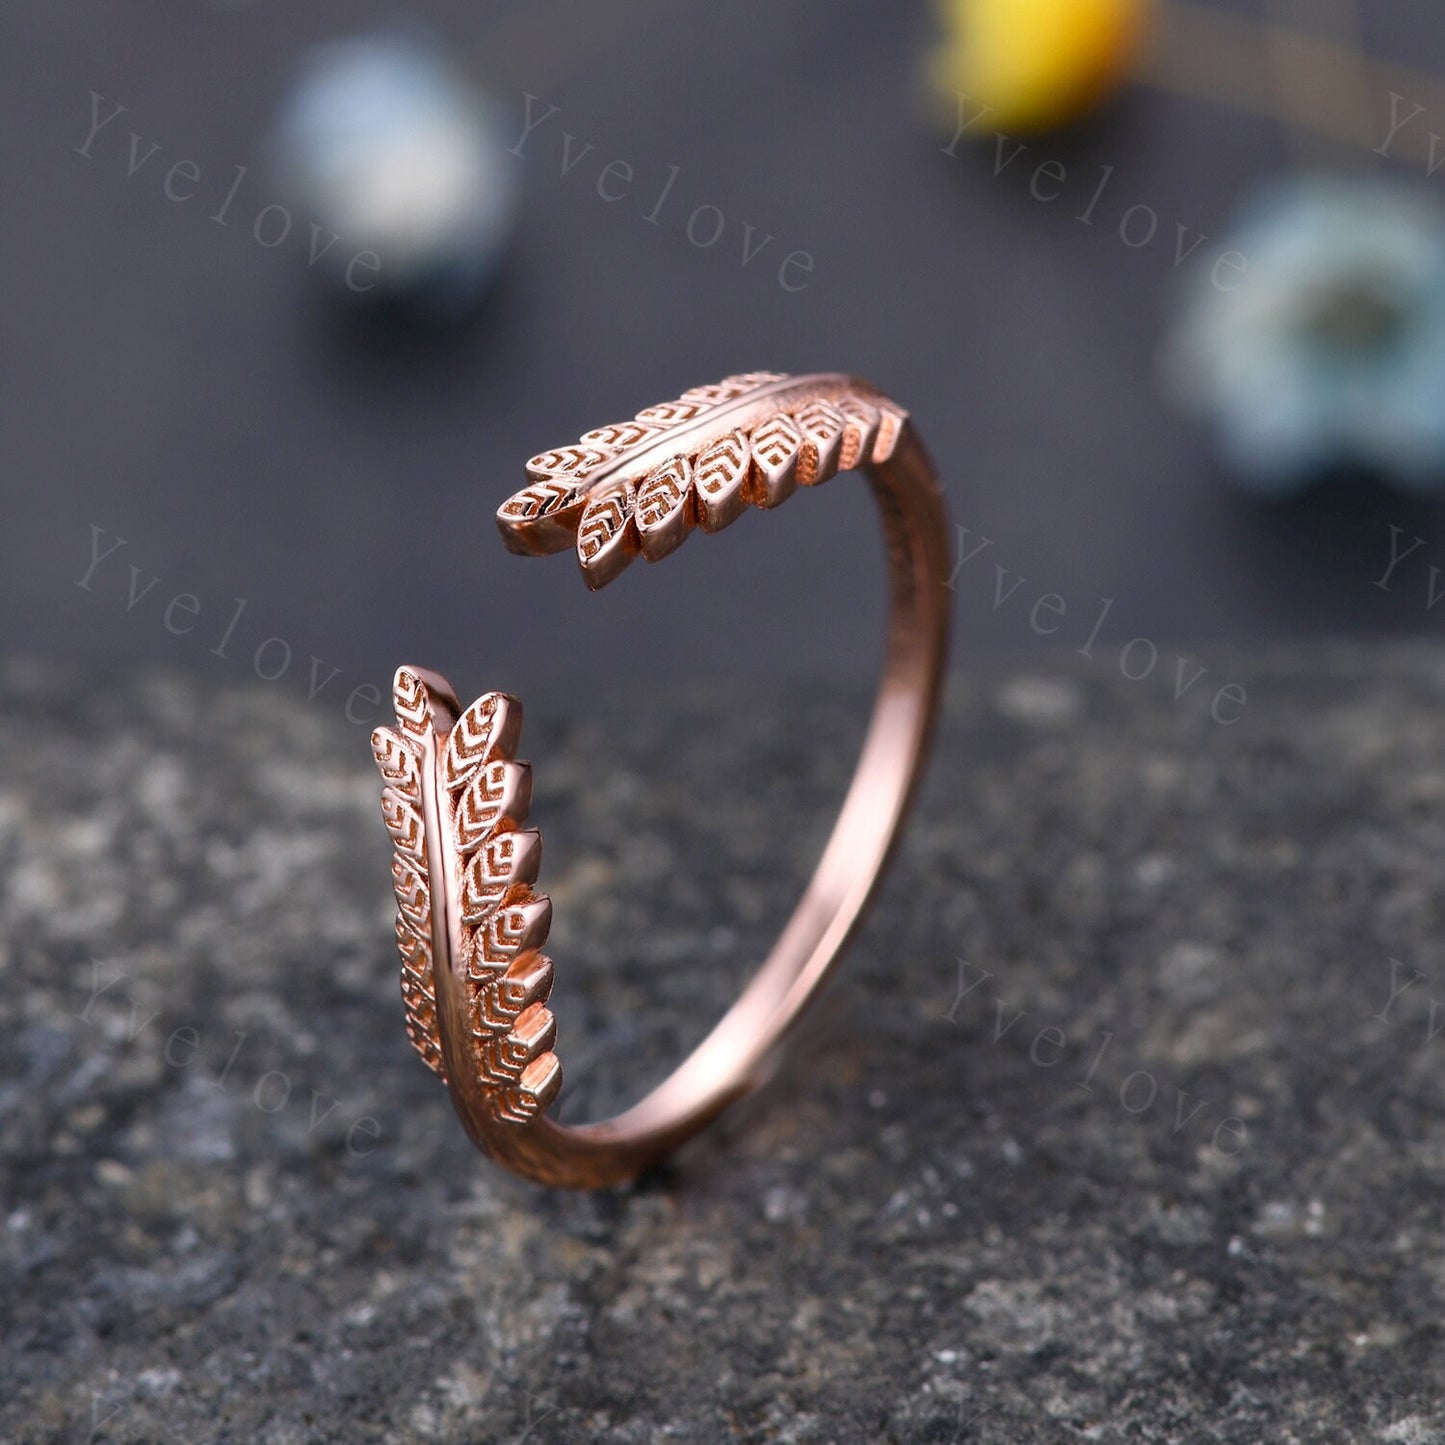 Vintage Leaf Engagement Ring Open Ring Feather Wedding Band 14K Solid Gold Minimalist Stacking Matching Ring Wedding Gift For Her Customized